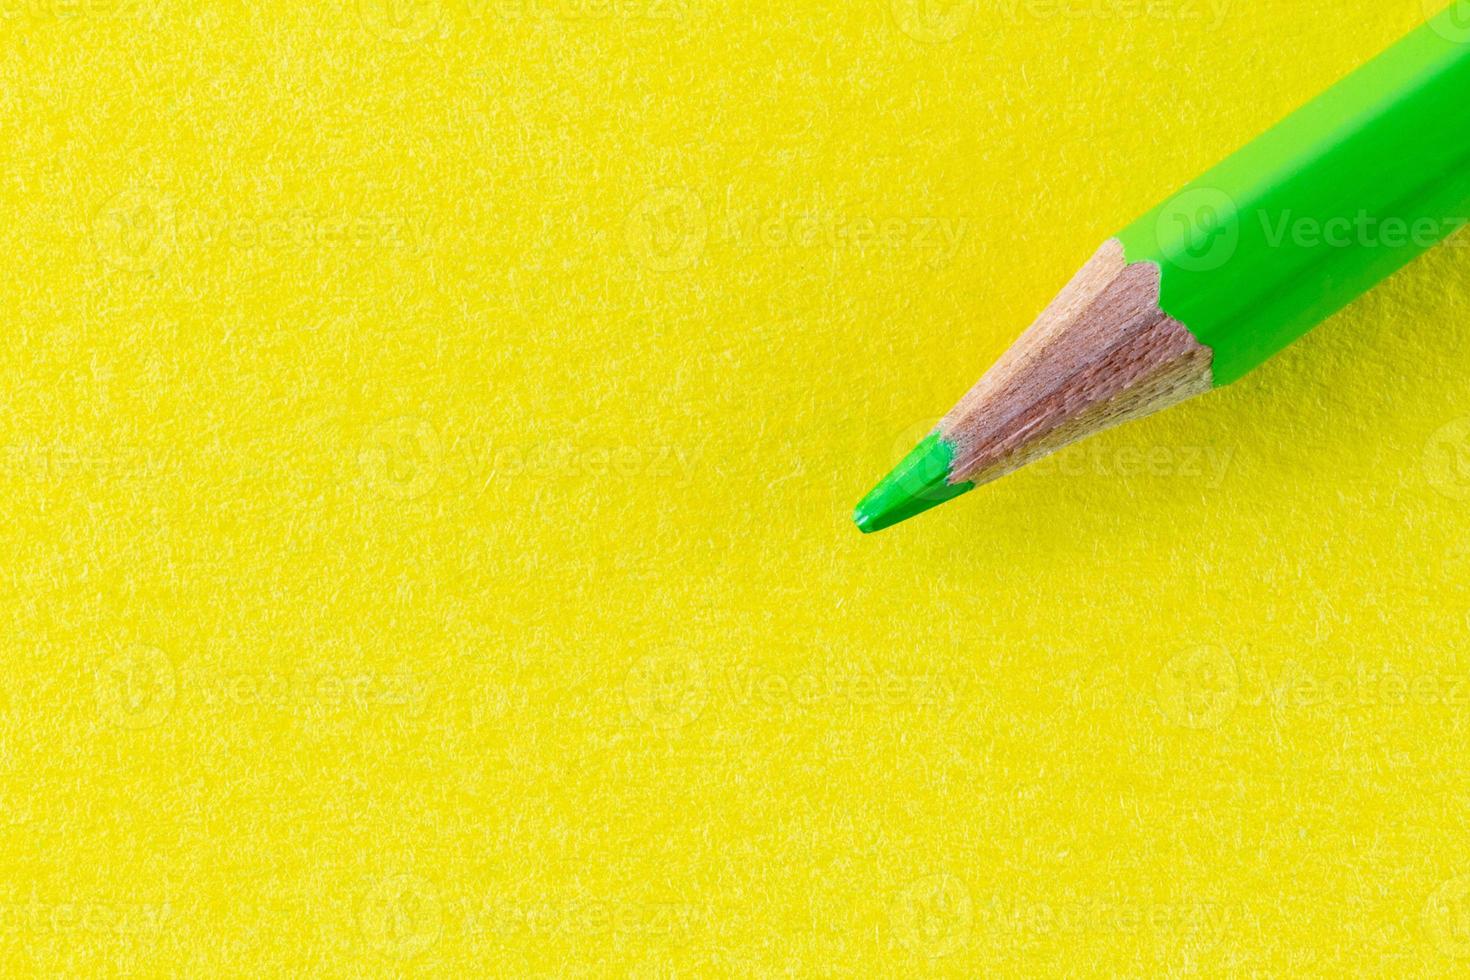 Green color pencil on yellow color paper arranged diagonally photo